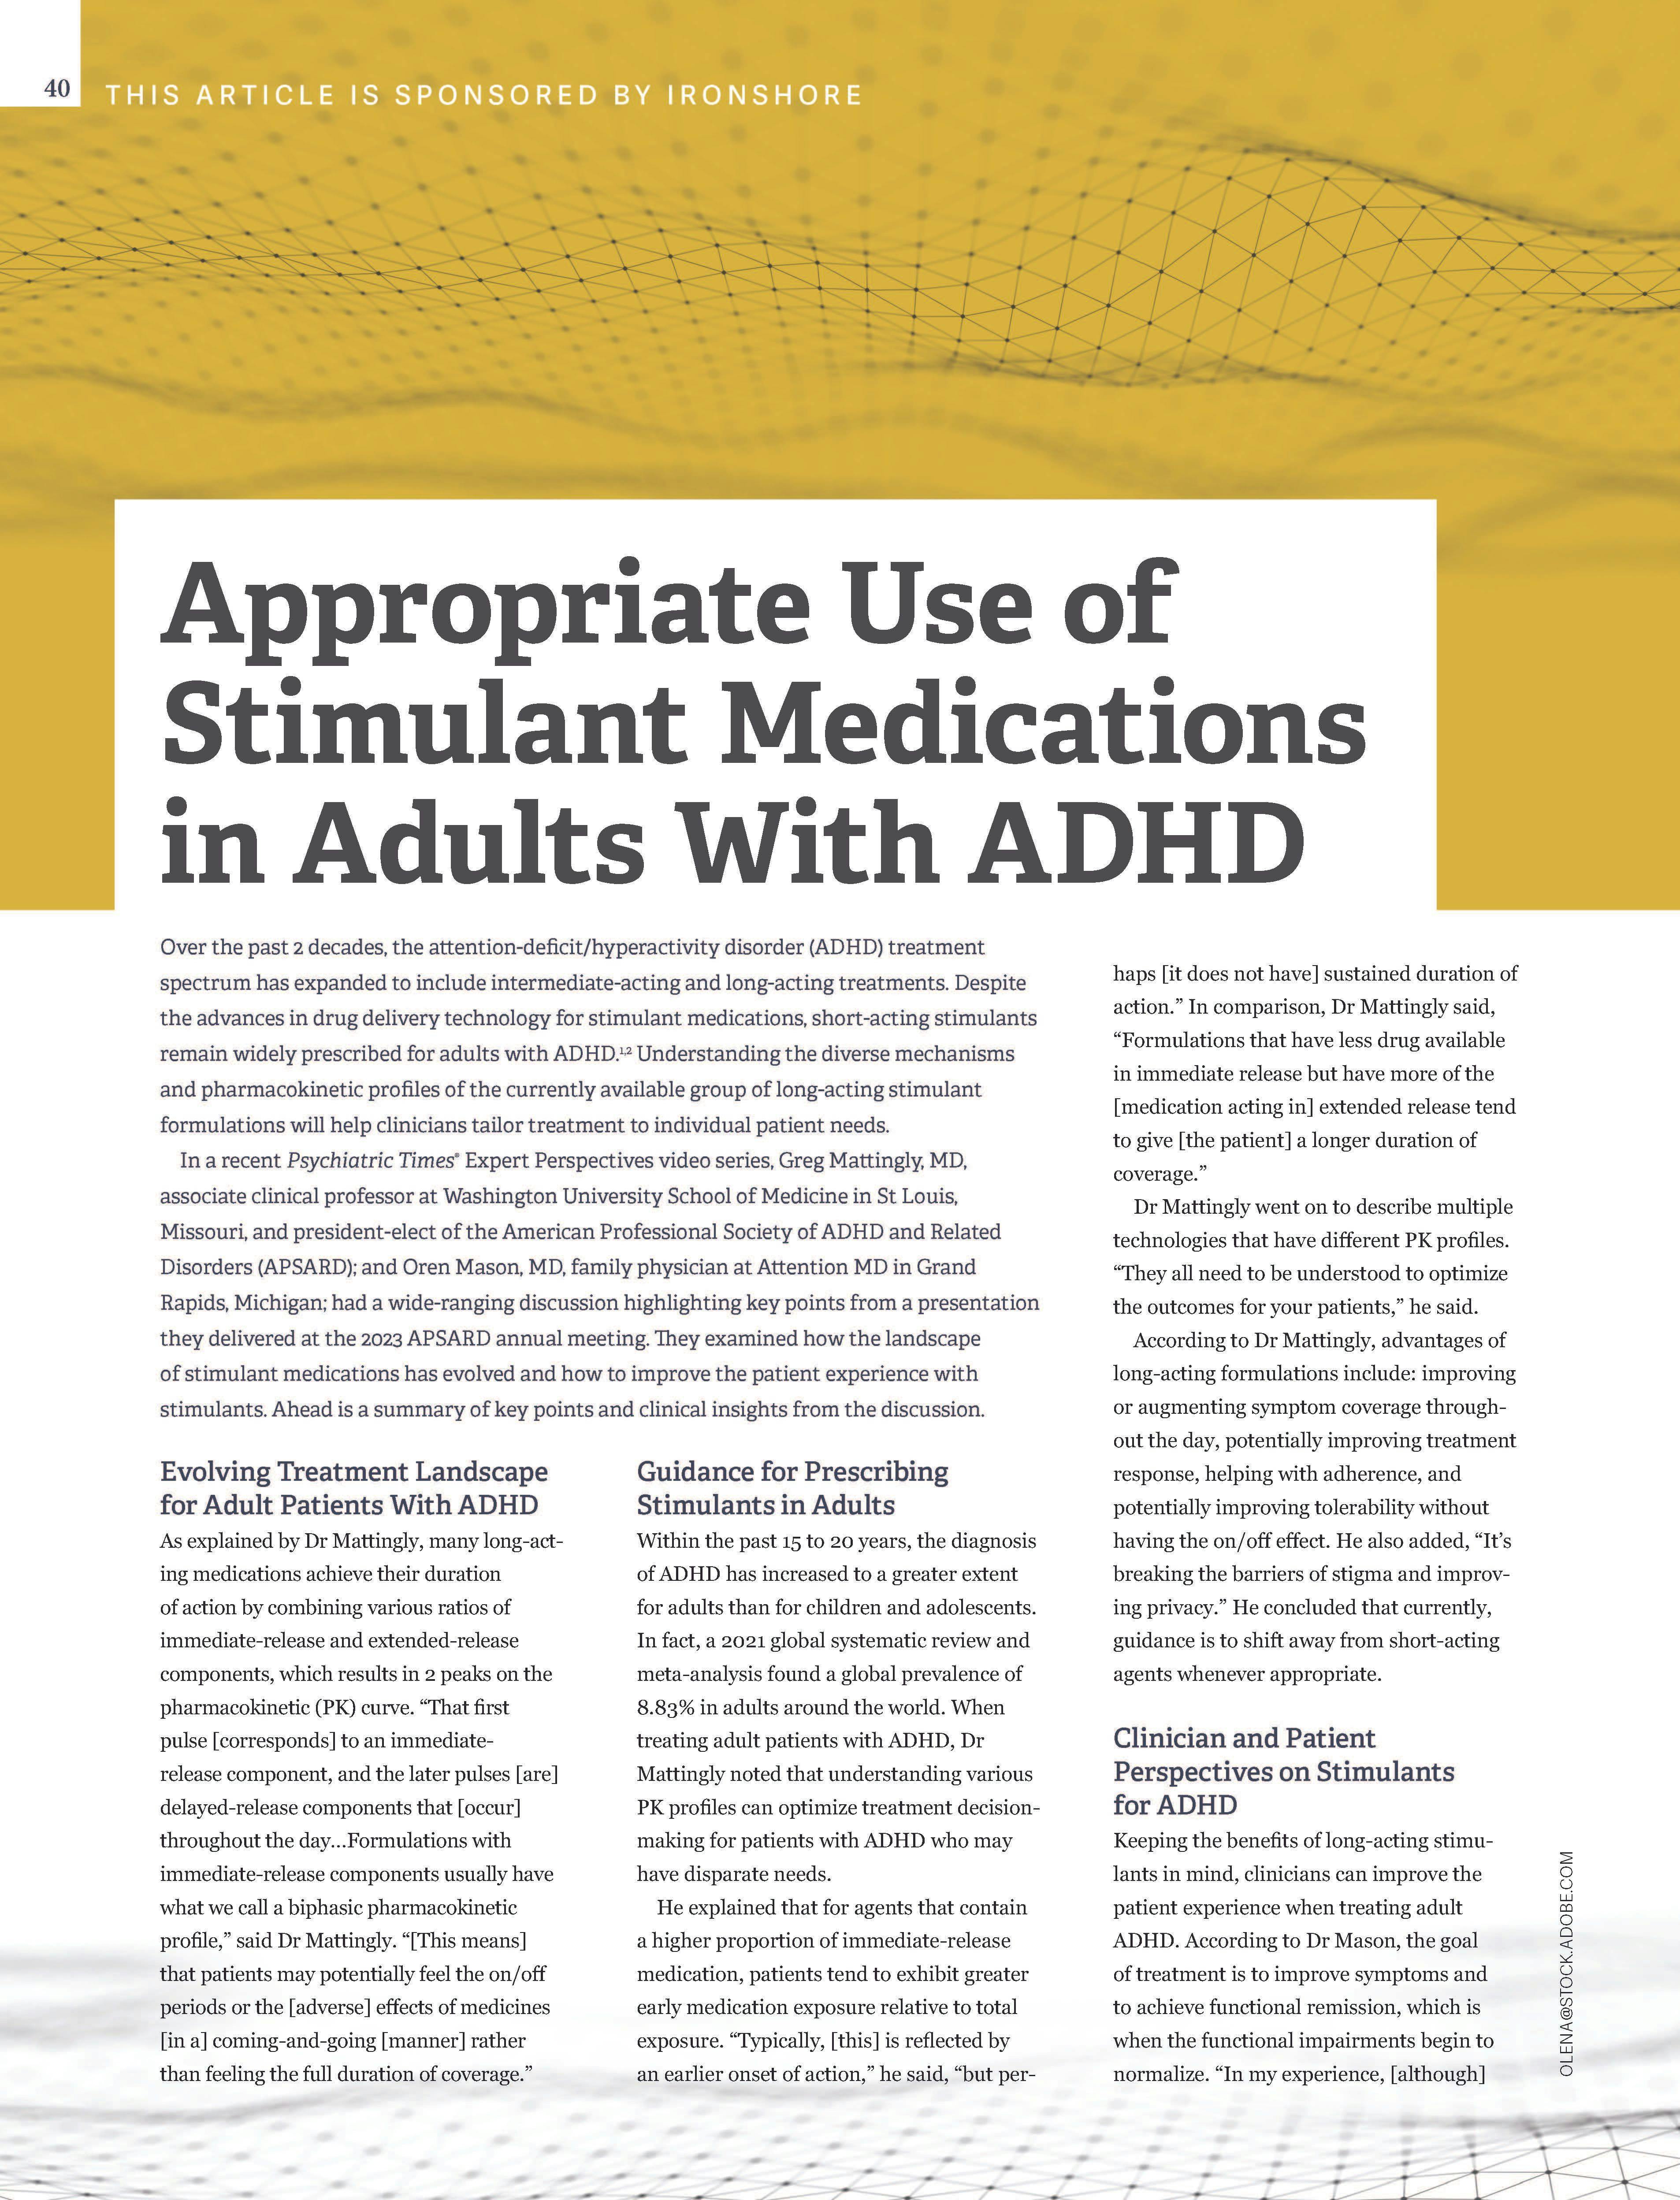 Appropriate Use of Stimulant Medications in Adults With ADHD